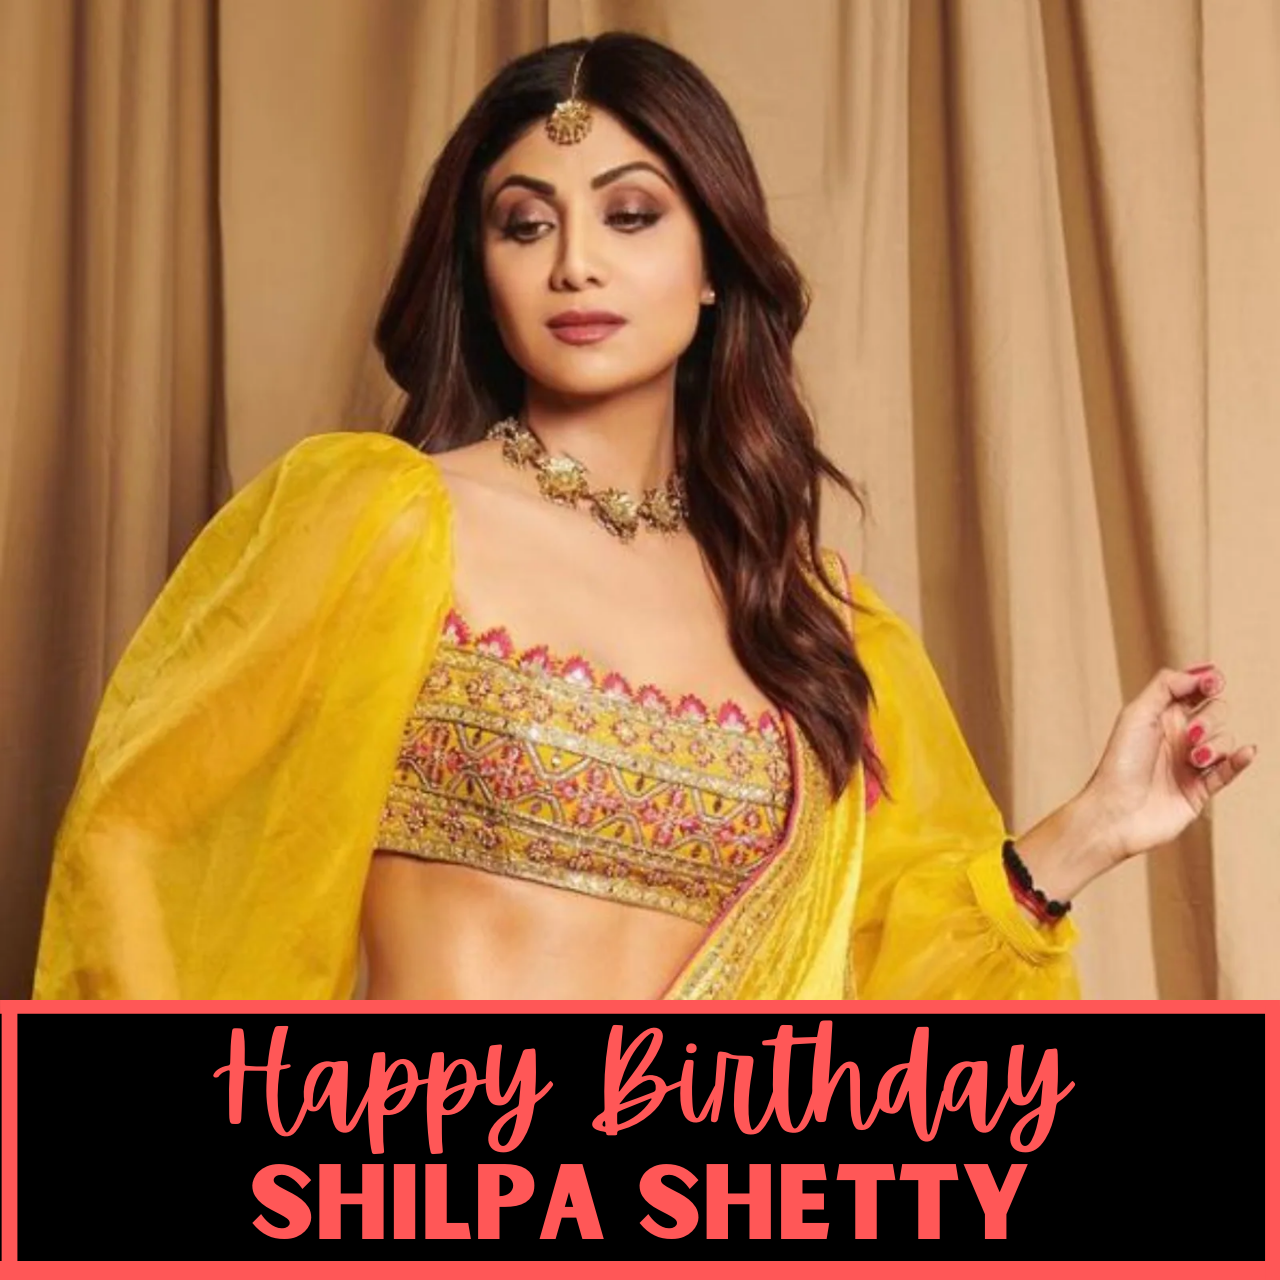 Happy Birthday Shilpa Shetty: Images, Wishes, Quotes, Posters, Images, and Greetings to greet Bollywood diva